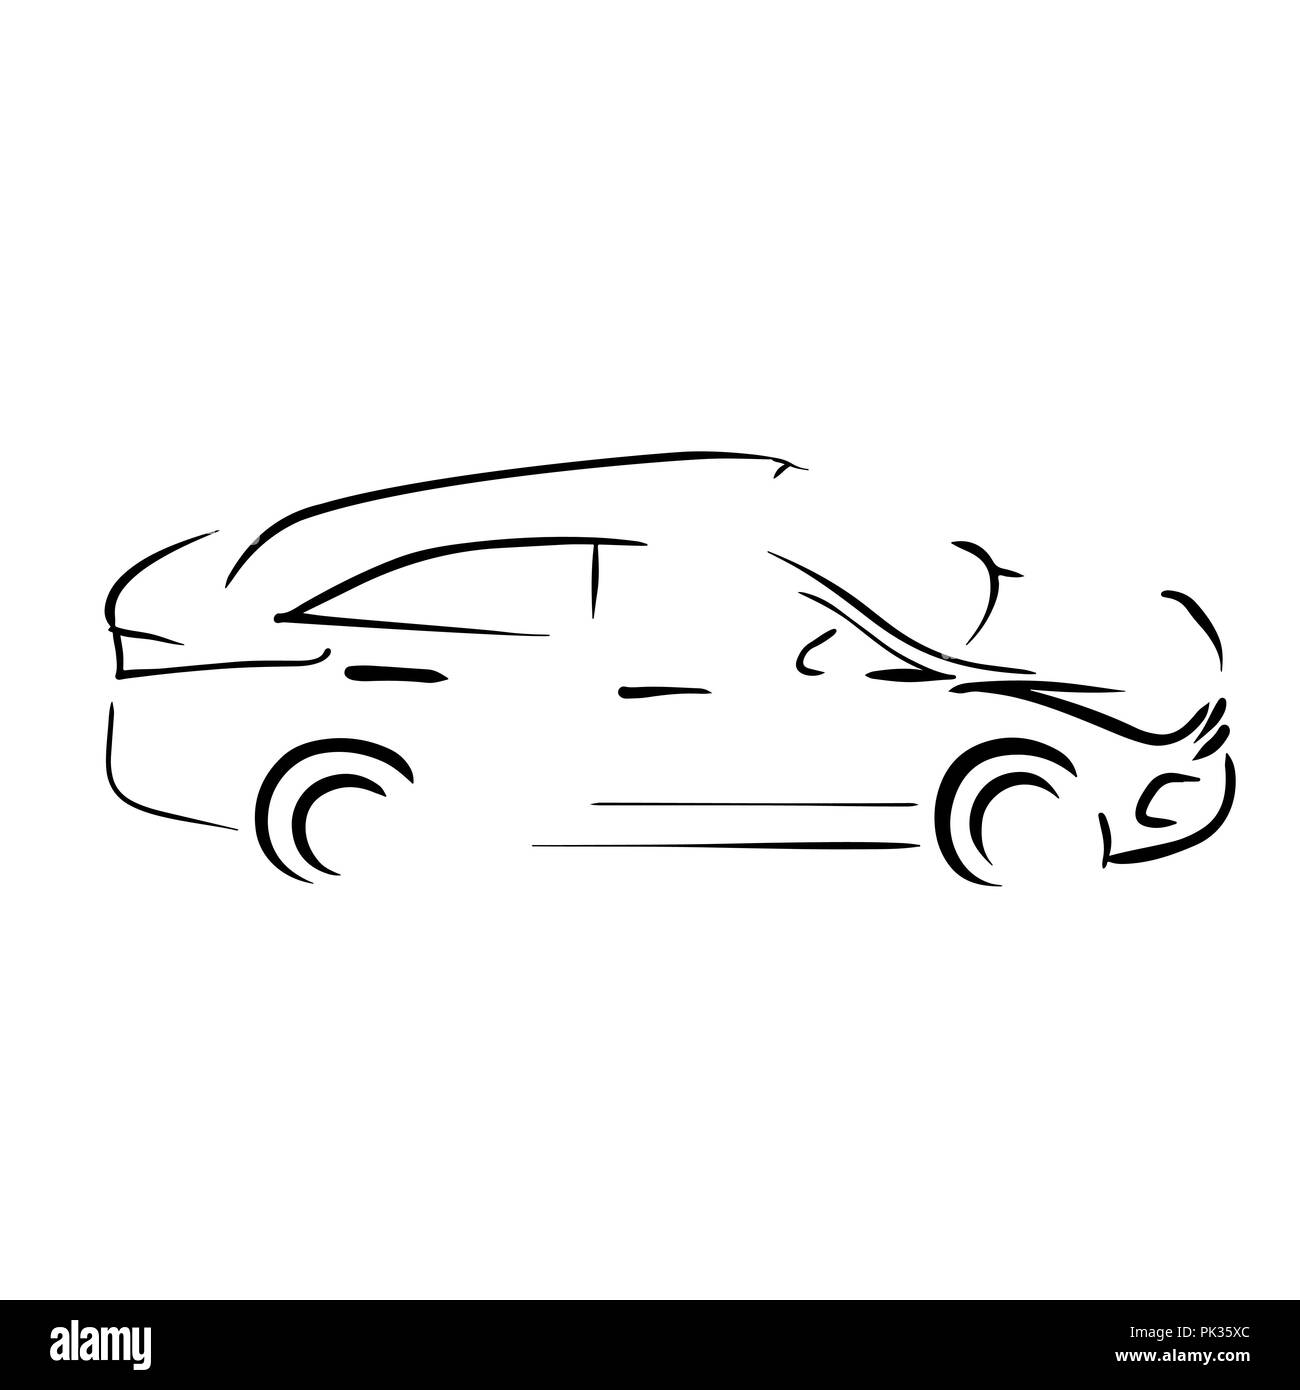 How To Draw Car Easy Step By Step For Kids